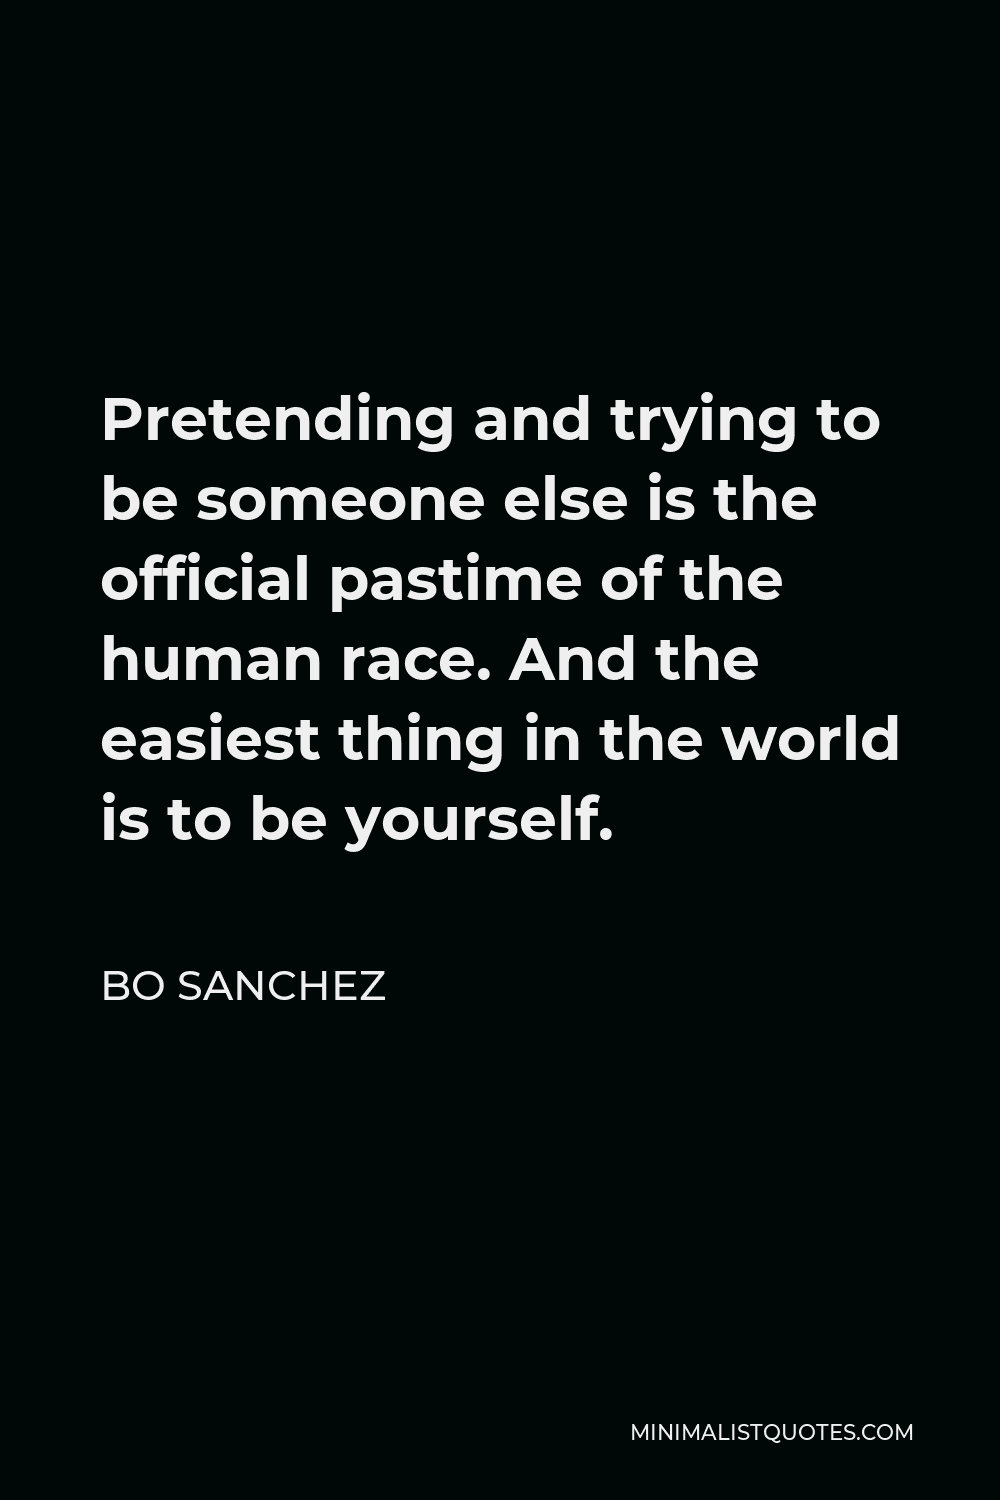 Bo Sanchez Quote - Pretending and trying to be someone else is the official pastime of the human race. And the easiest thing in the world is to be yourself.